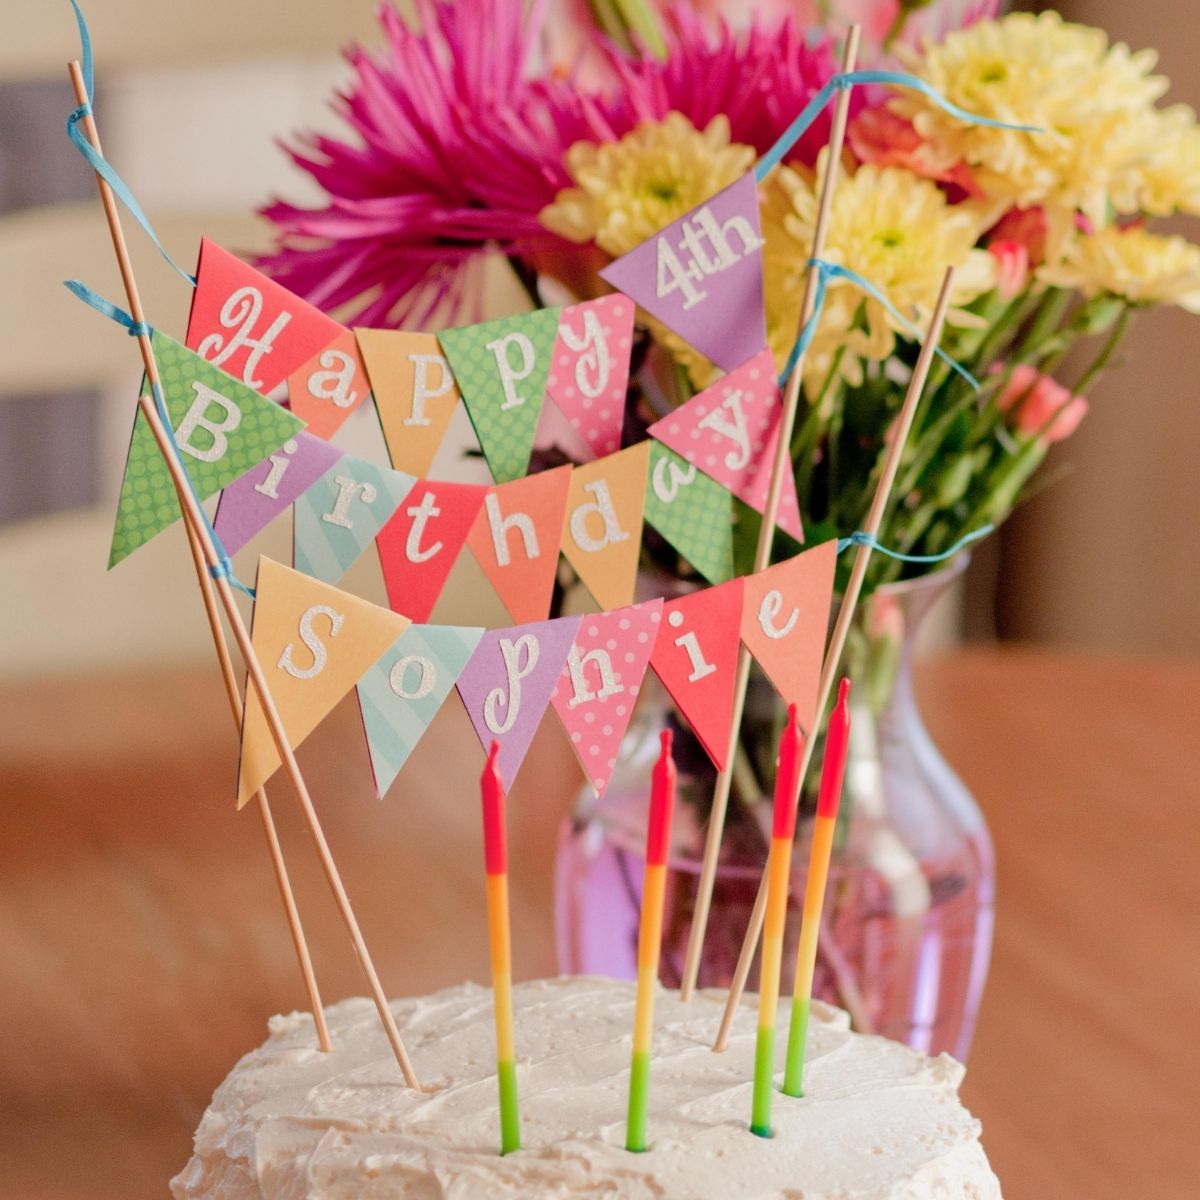 A rainbow papered cake bunting says "Happy Birthday, Sophie."